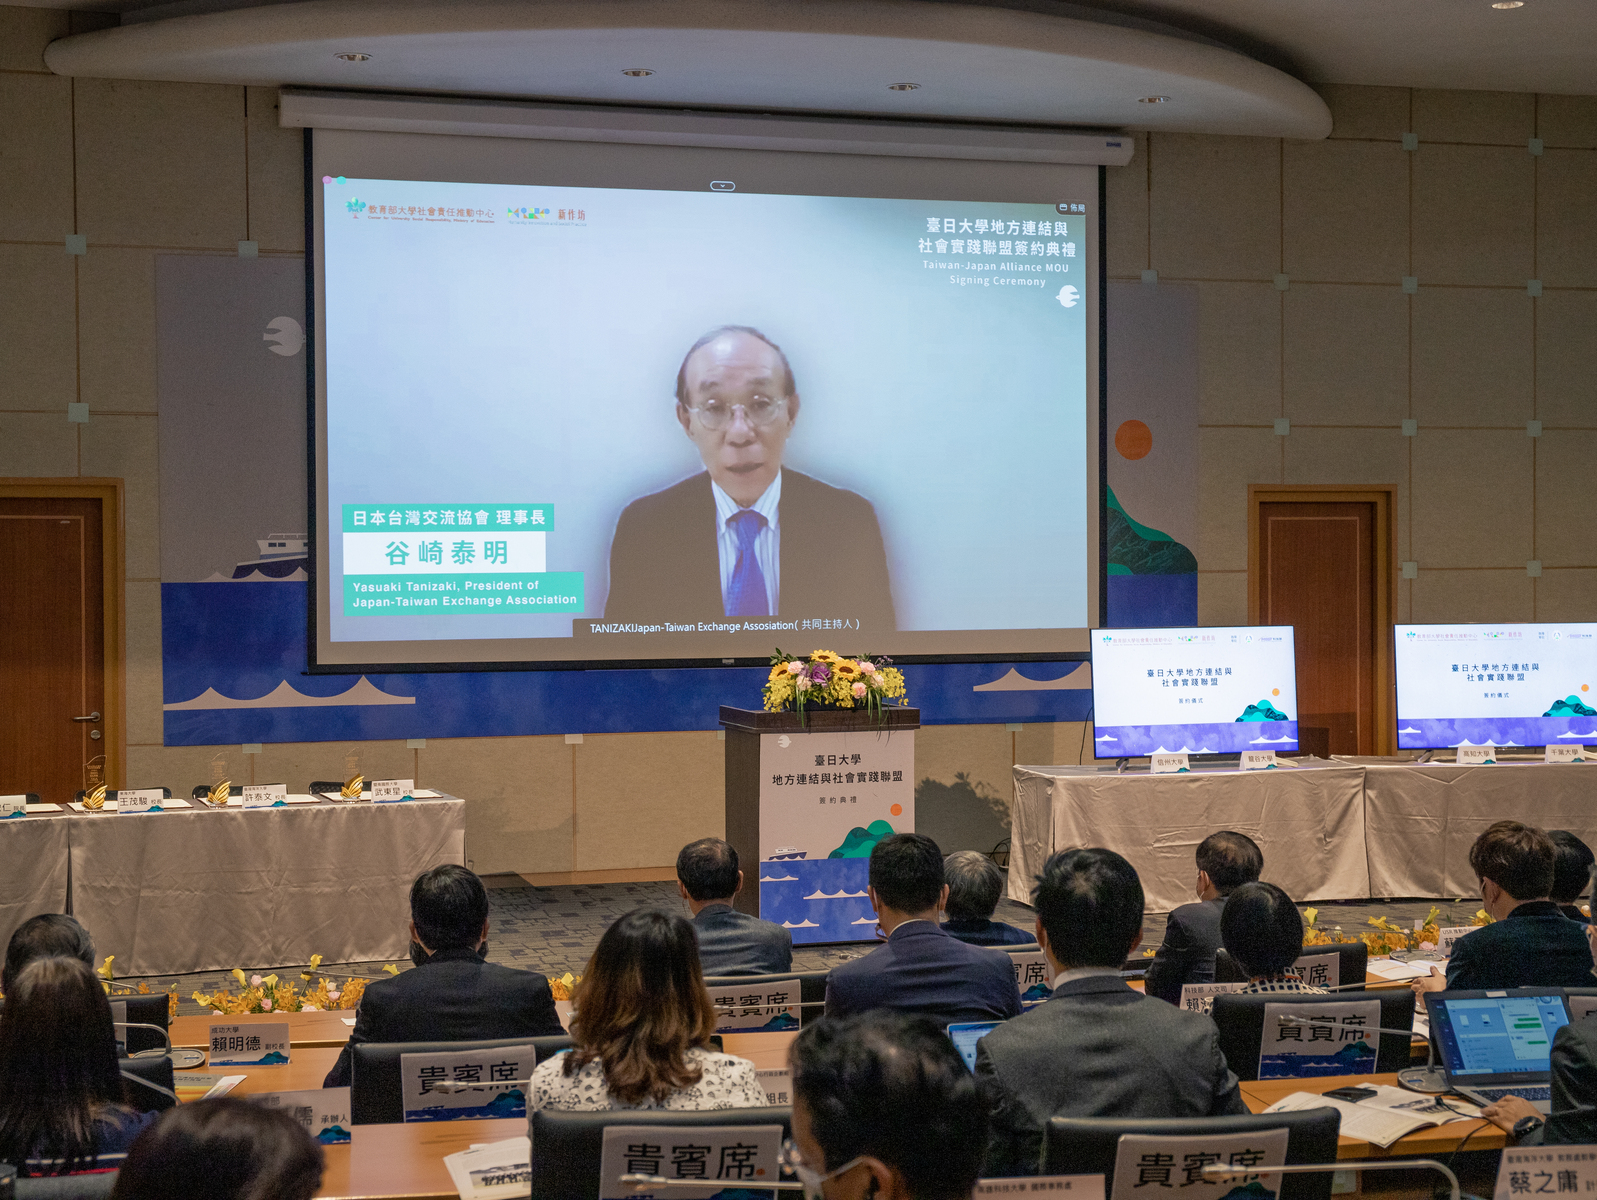 Chairman of Japan–Taiwan Exchange Association Yasuaki Tanizaki congratulated the parties on the establishment of the Taiwan-Japan Alliance of Local Revitalization and Social Practice via videoconference. (Photo by Taiwan-Japan Alliance of Local Revitalization and Social Practice)